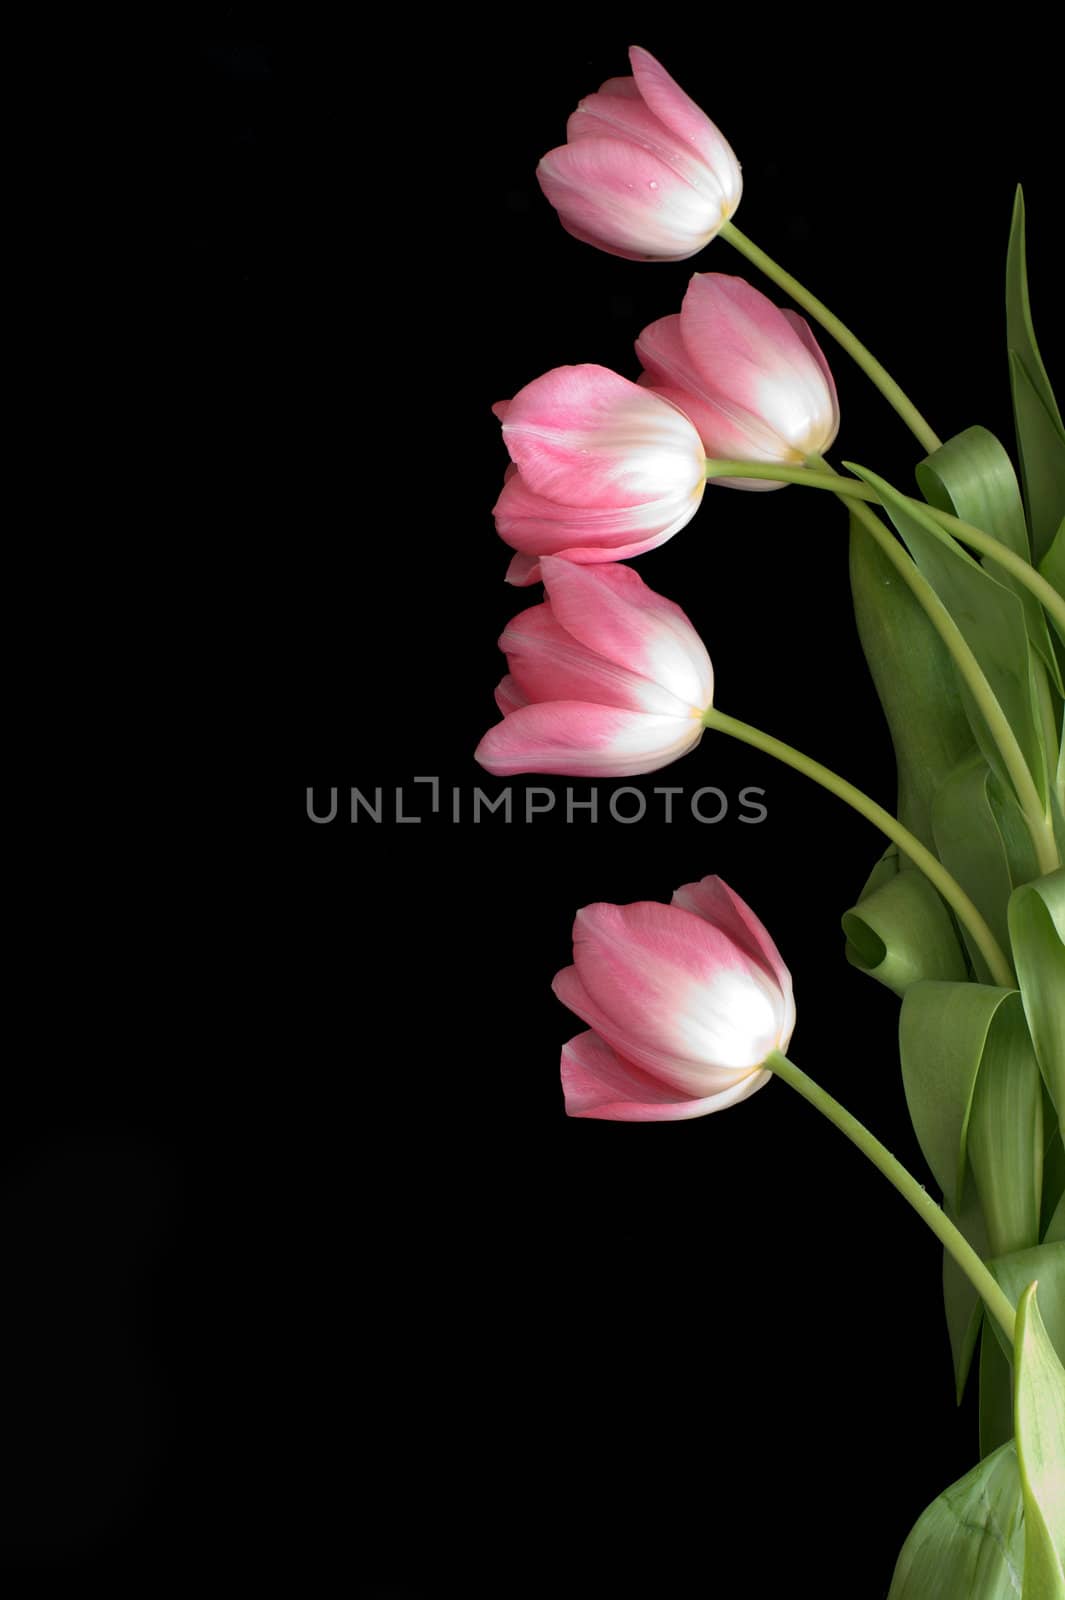 Lots of pink tulips on a black background